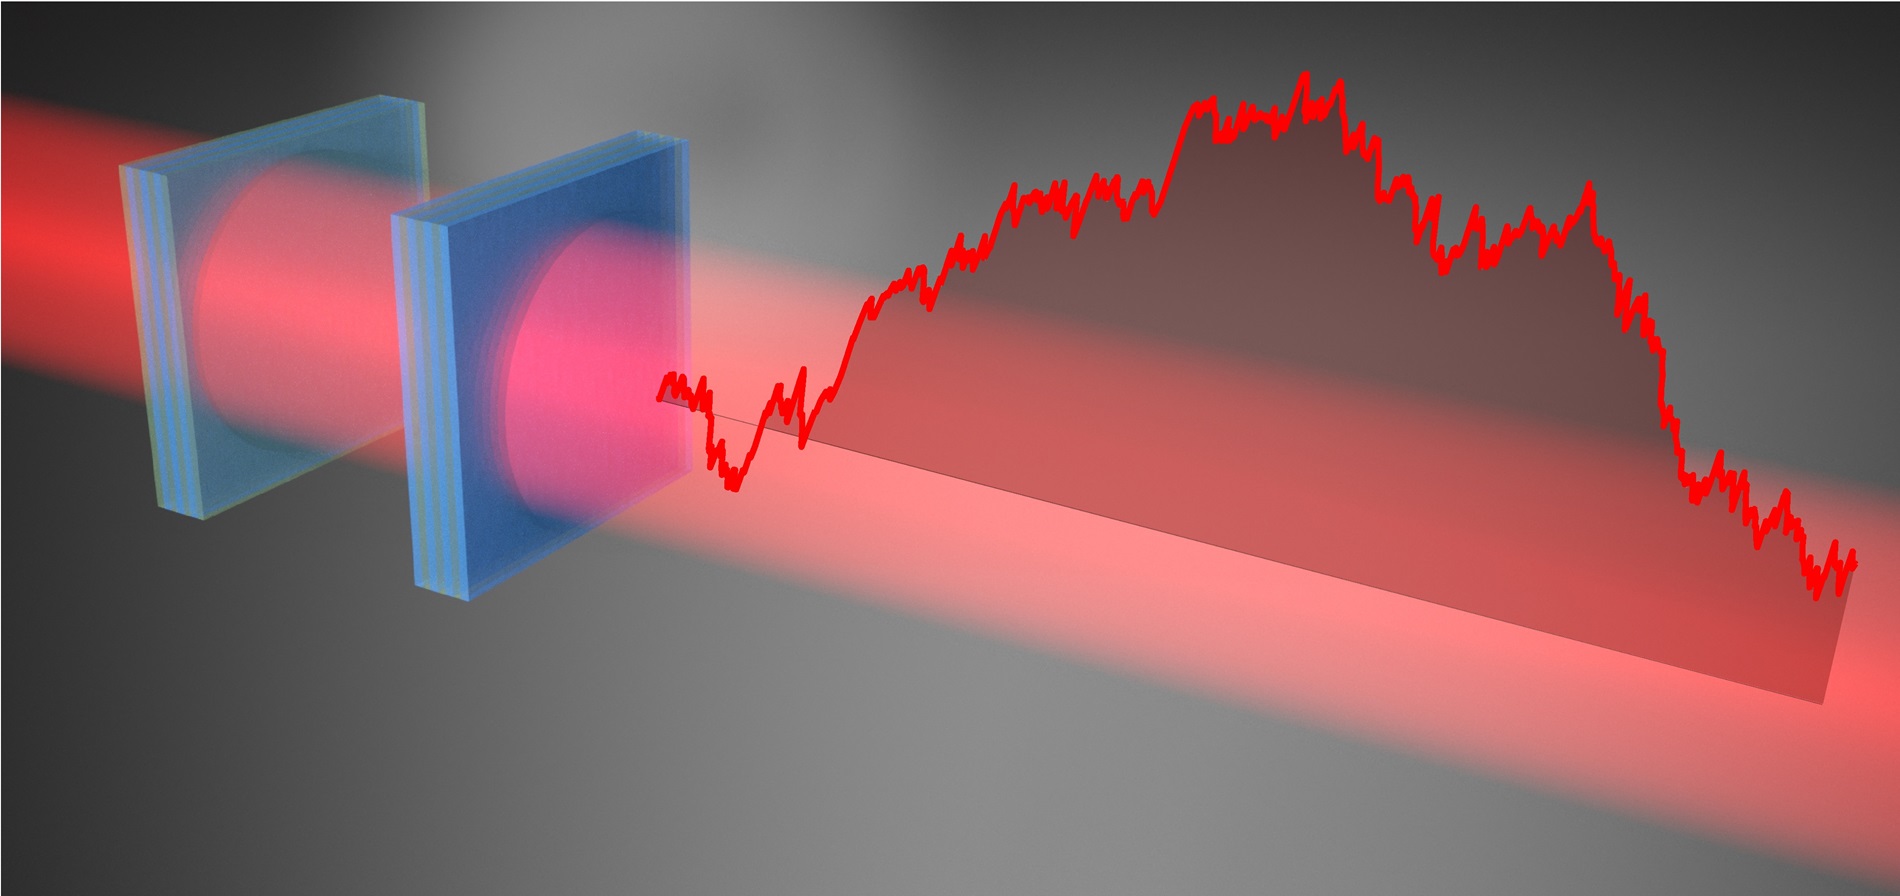 Light transmitted through an optical resonator obeys the arcsine laws.